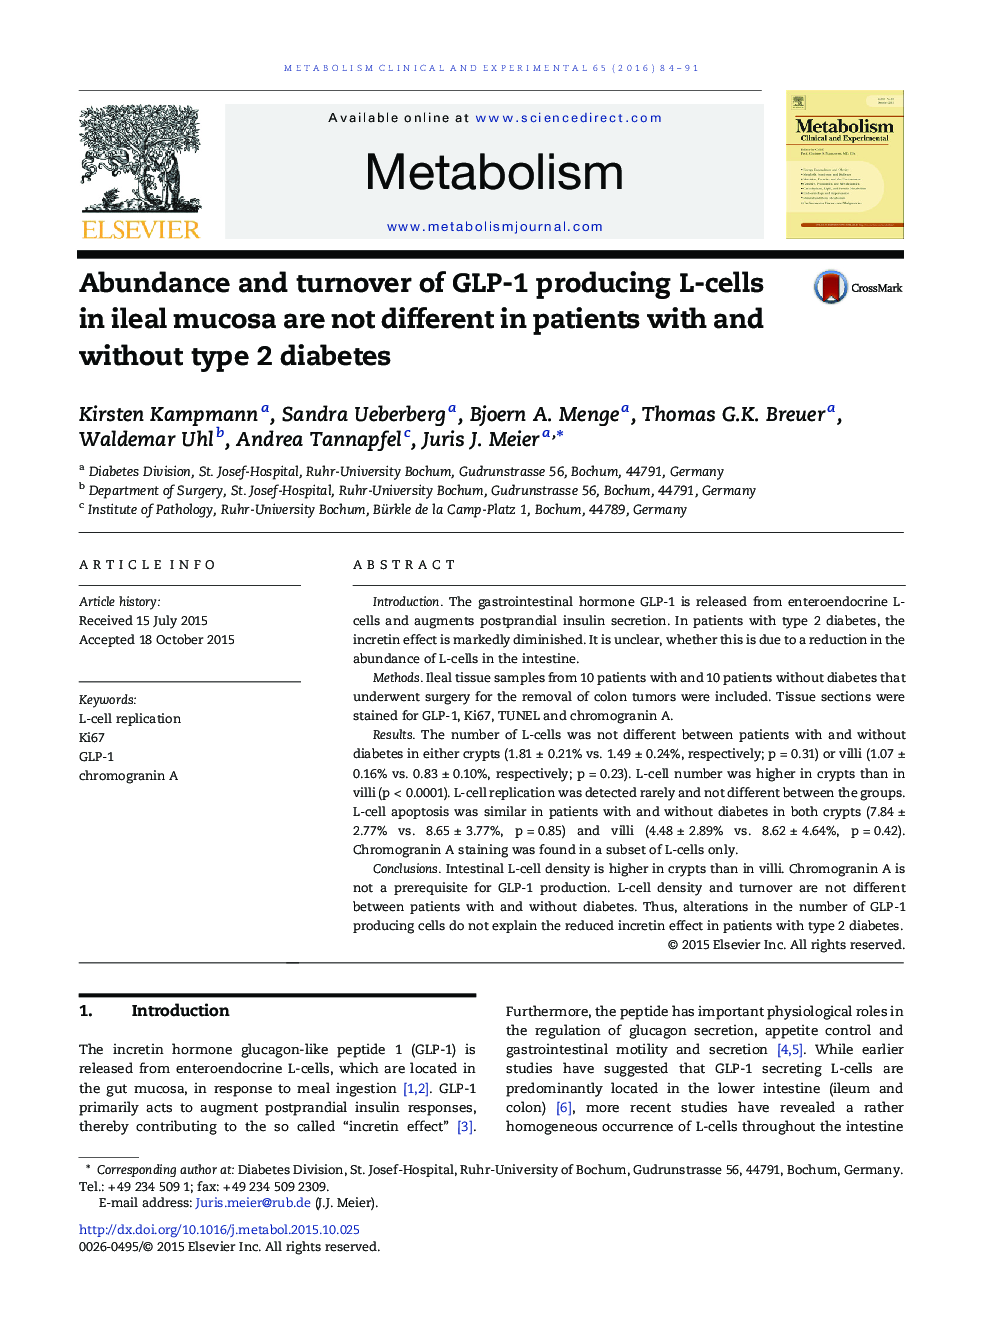 Abundance and turnover of GLP-1 producing L-cells in ileal mucosa are not different in patients with and without type 2 diabetes